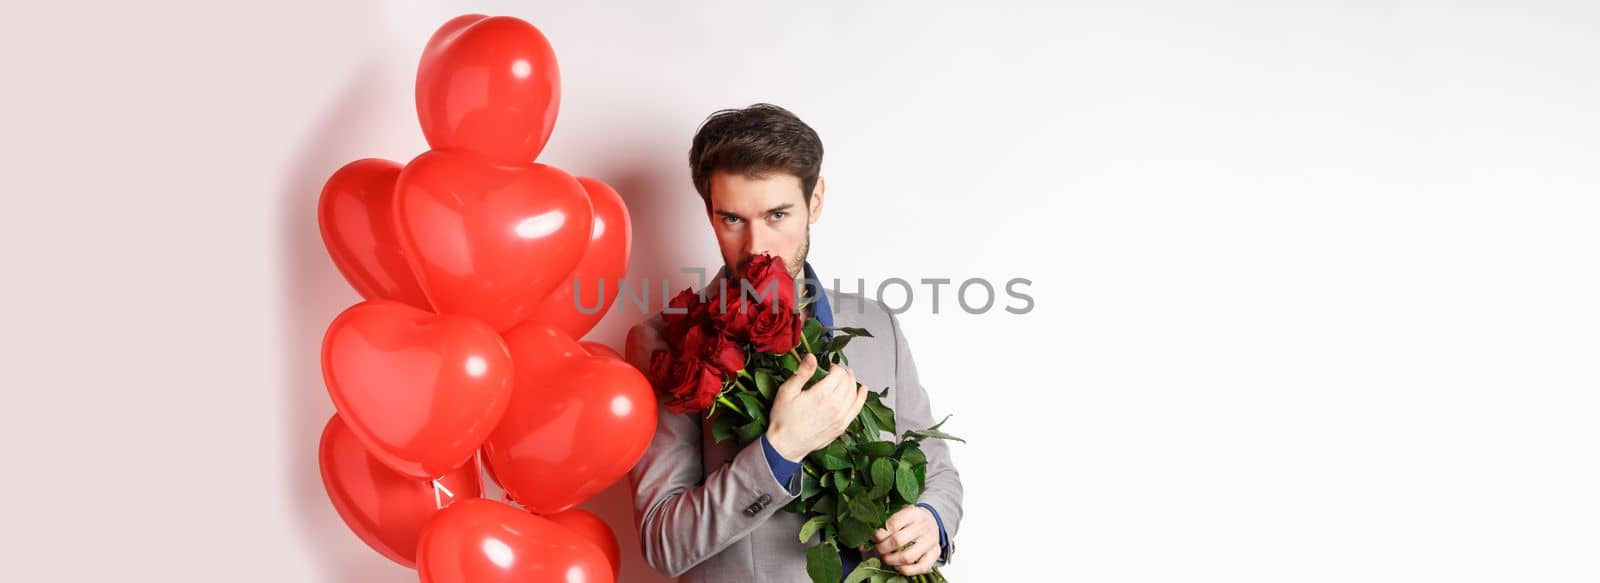 Romantic man smell bouquet of red roses and looking passionate at camera. Boyfriend in suit going on Valentines date with gifts and heart balloons, white background.